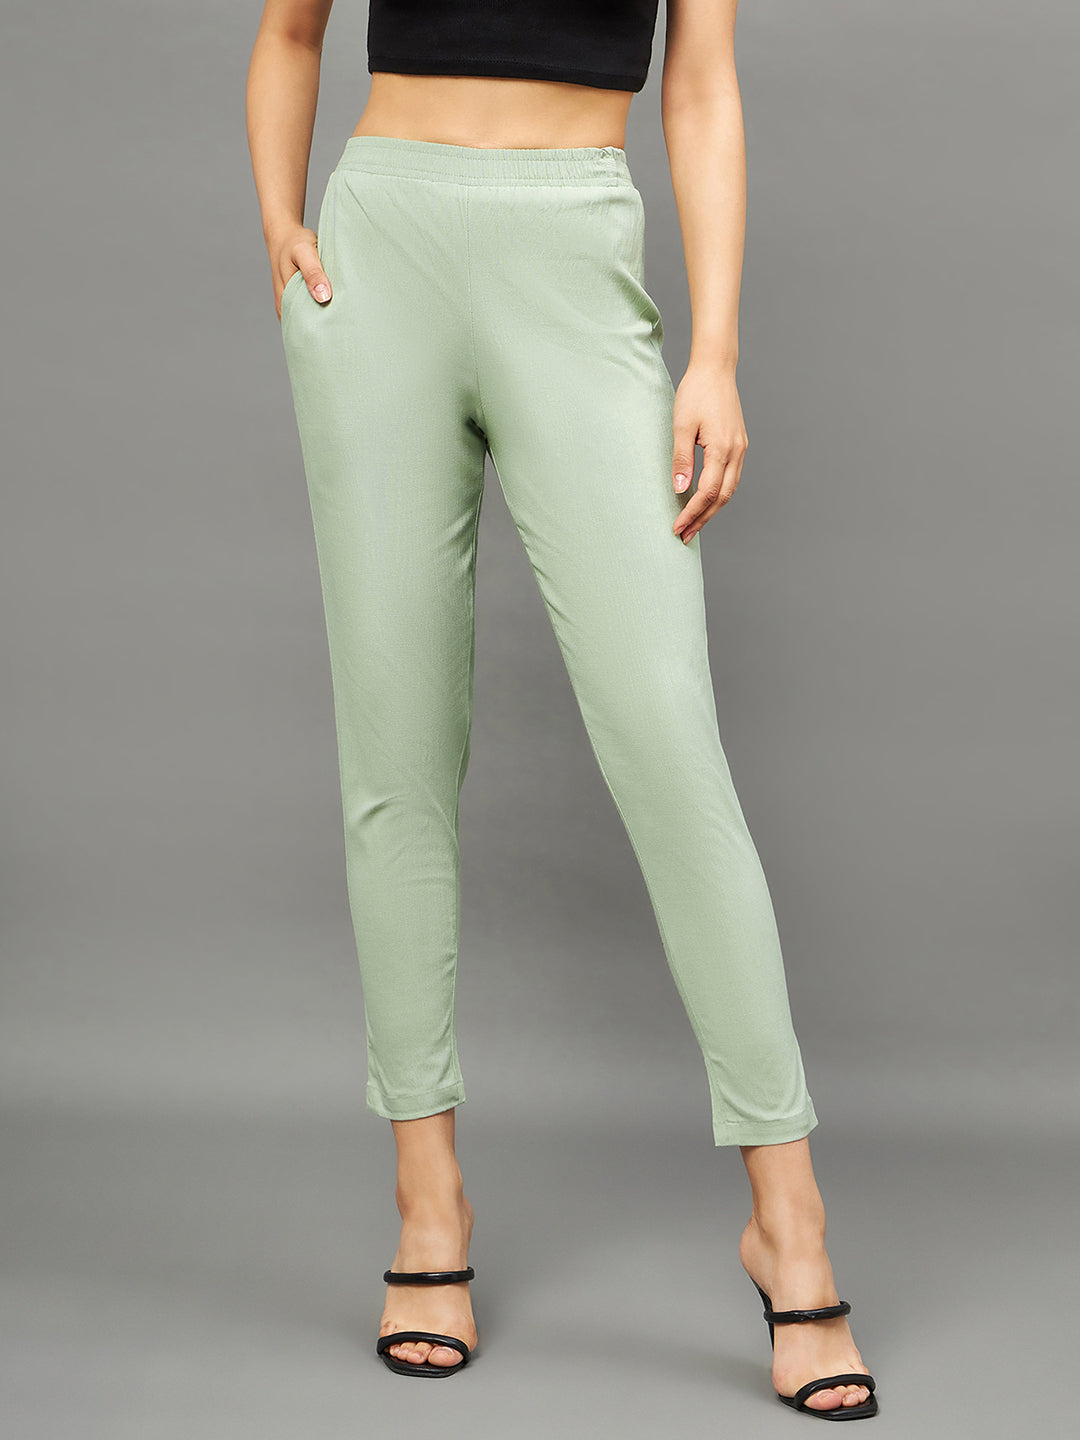 Pista Green Colour Straight Pant – The Pajama Factory